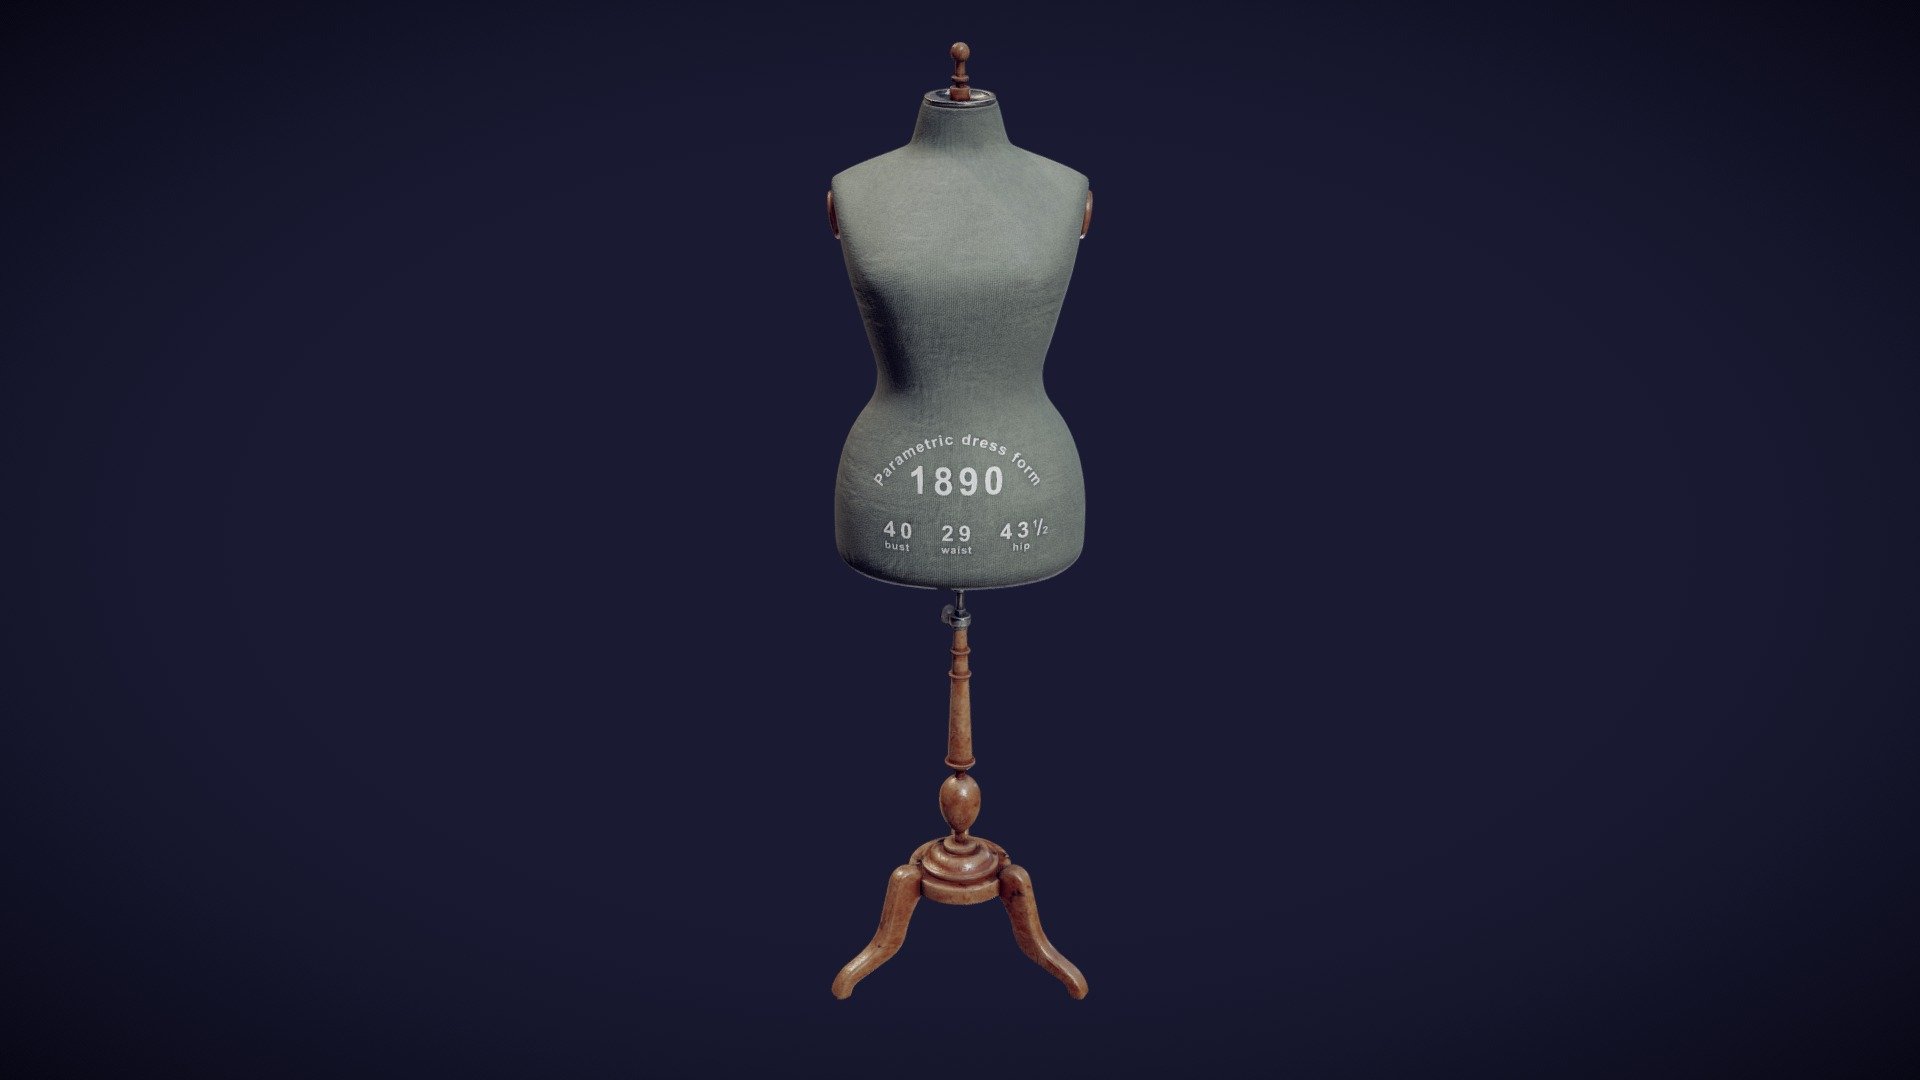 The 3D model presents a historical mannequin (a dress form) dating to 1890. The virtual mannequin was generated automatically by using a new method of parametric modelling (for further details see https://doi.org/10.1108/IJCST-06-2019-0093). The values of body measurements were taken from a sizing table published in “The Cutters Practical Guide to the Cutting of Ladies’ Garments” (V.D.F. Vincent, 1890). The measurements of the mannequin are: bust – 40 inches; waist – 29 inches; hip – 43.5 inches. The authors of the 3D model are

Aleksei Moskvin https://independent.academia.edu/AlekseiMoskvin

Mariia Moskvina https://independent.academia.edu/MariiaMoskvina

(Saint Petersburg State University of Industrial Technologies and Design)

DOI: http://dx.doi.org/10.13140/RG.2.2.24232.70402
https://www.researchgate.net/publication/357168467_1890_dress_form_size_40

The authors thank scientists from Ivanovo State Polytechnic University for providing information on historical mannequins 3d model